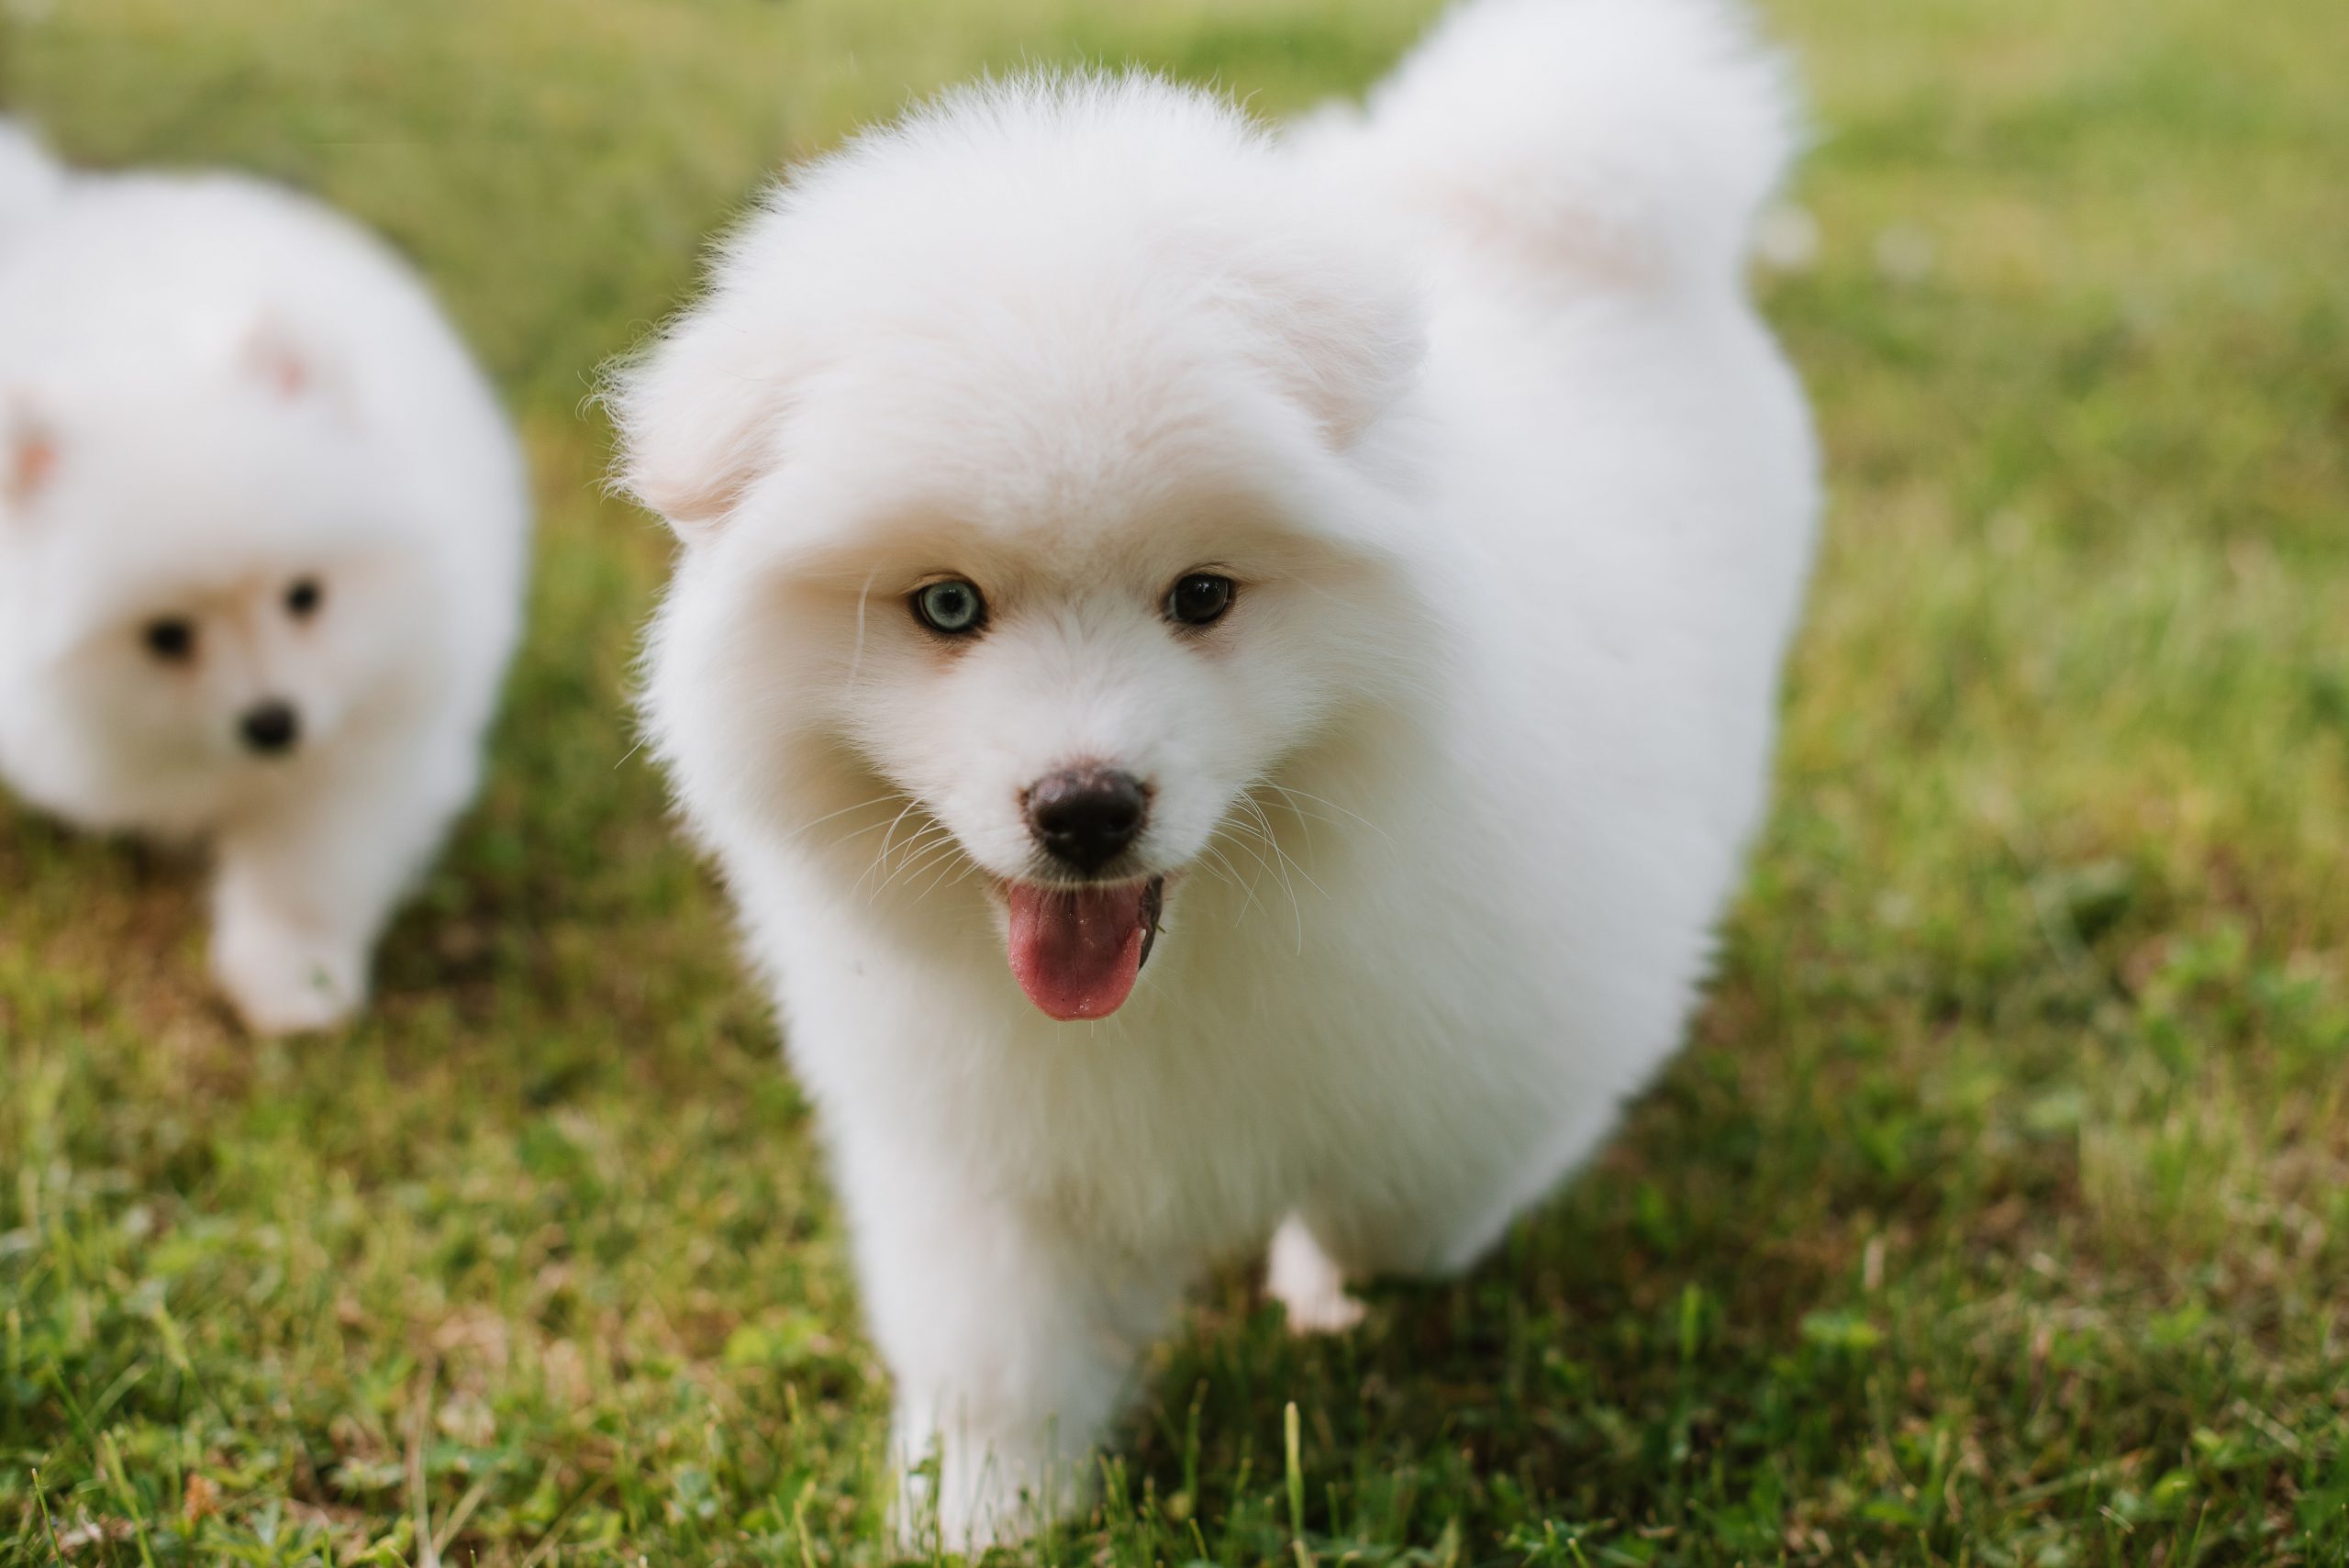 White,Little,Puppies,Playing,On,Green,Grass,During,Walking,In